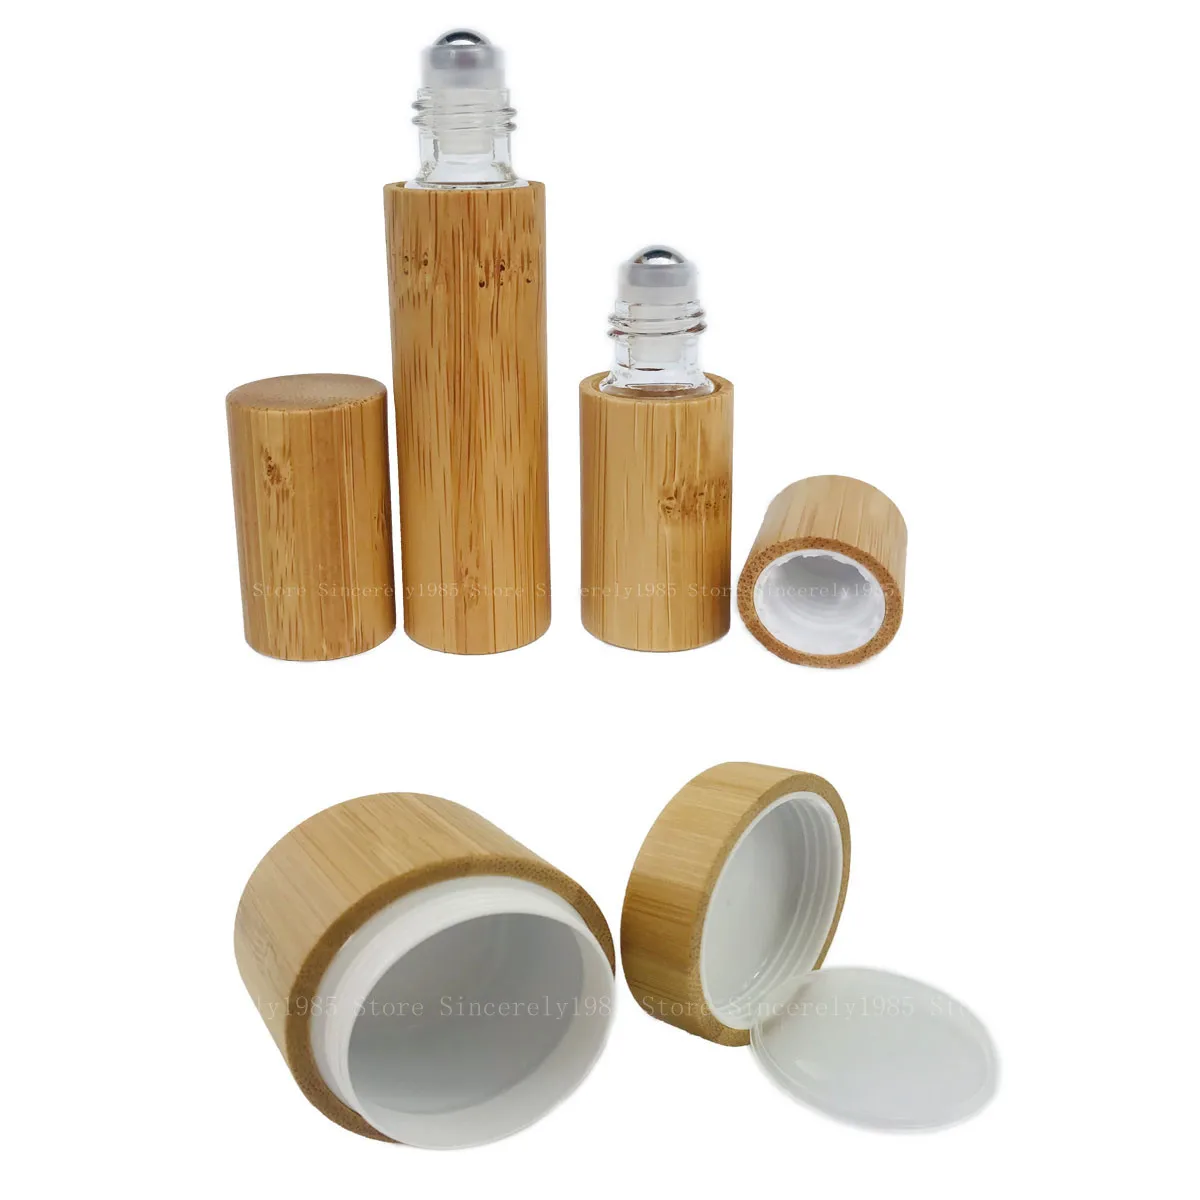 5ML 10ML Bamboo Wood Bottle Perfume Stainless Steel Roller Ball Aroma Diffuser Bottle, 30ml Face Cream Cosmetic Container Bottle bluetooth speaker air humidifier wood flame volcano lava aroma humidifier essential oil diffuser bedroom white noise hypnosis